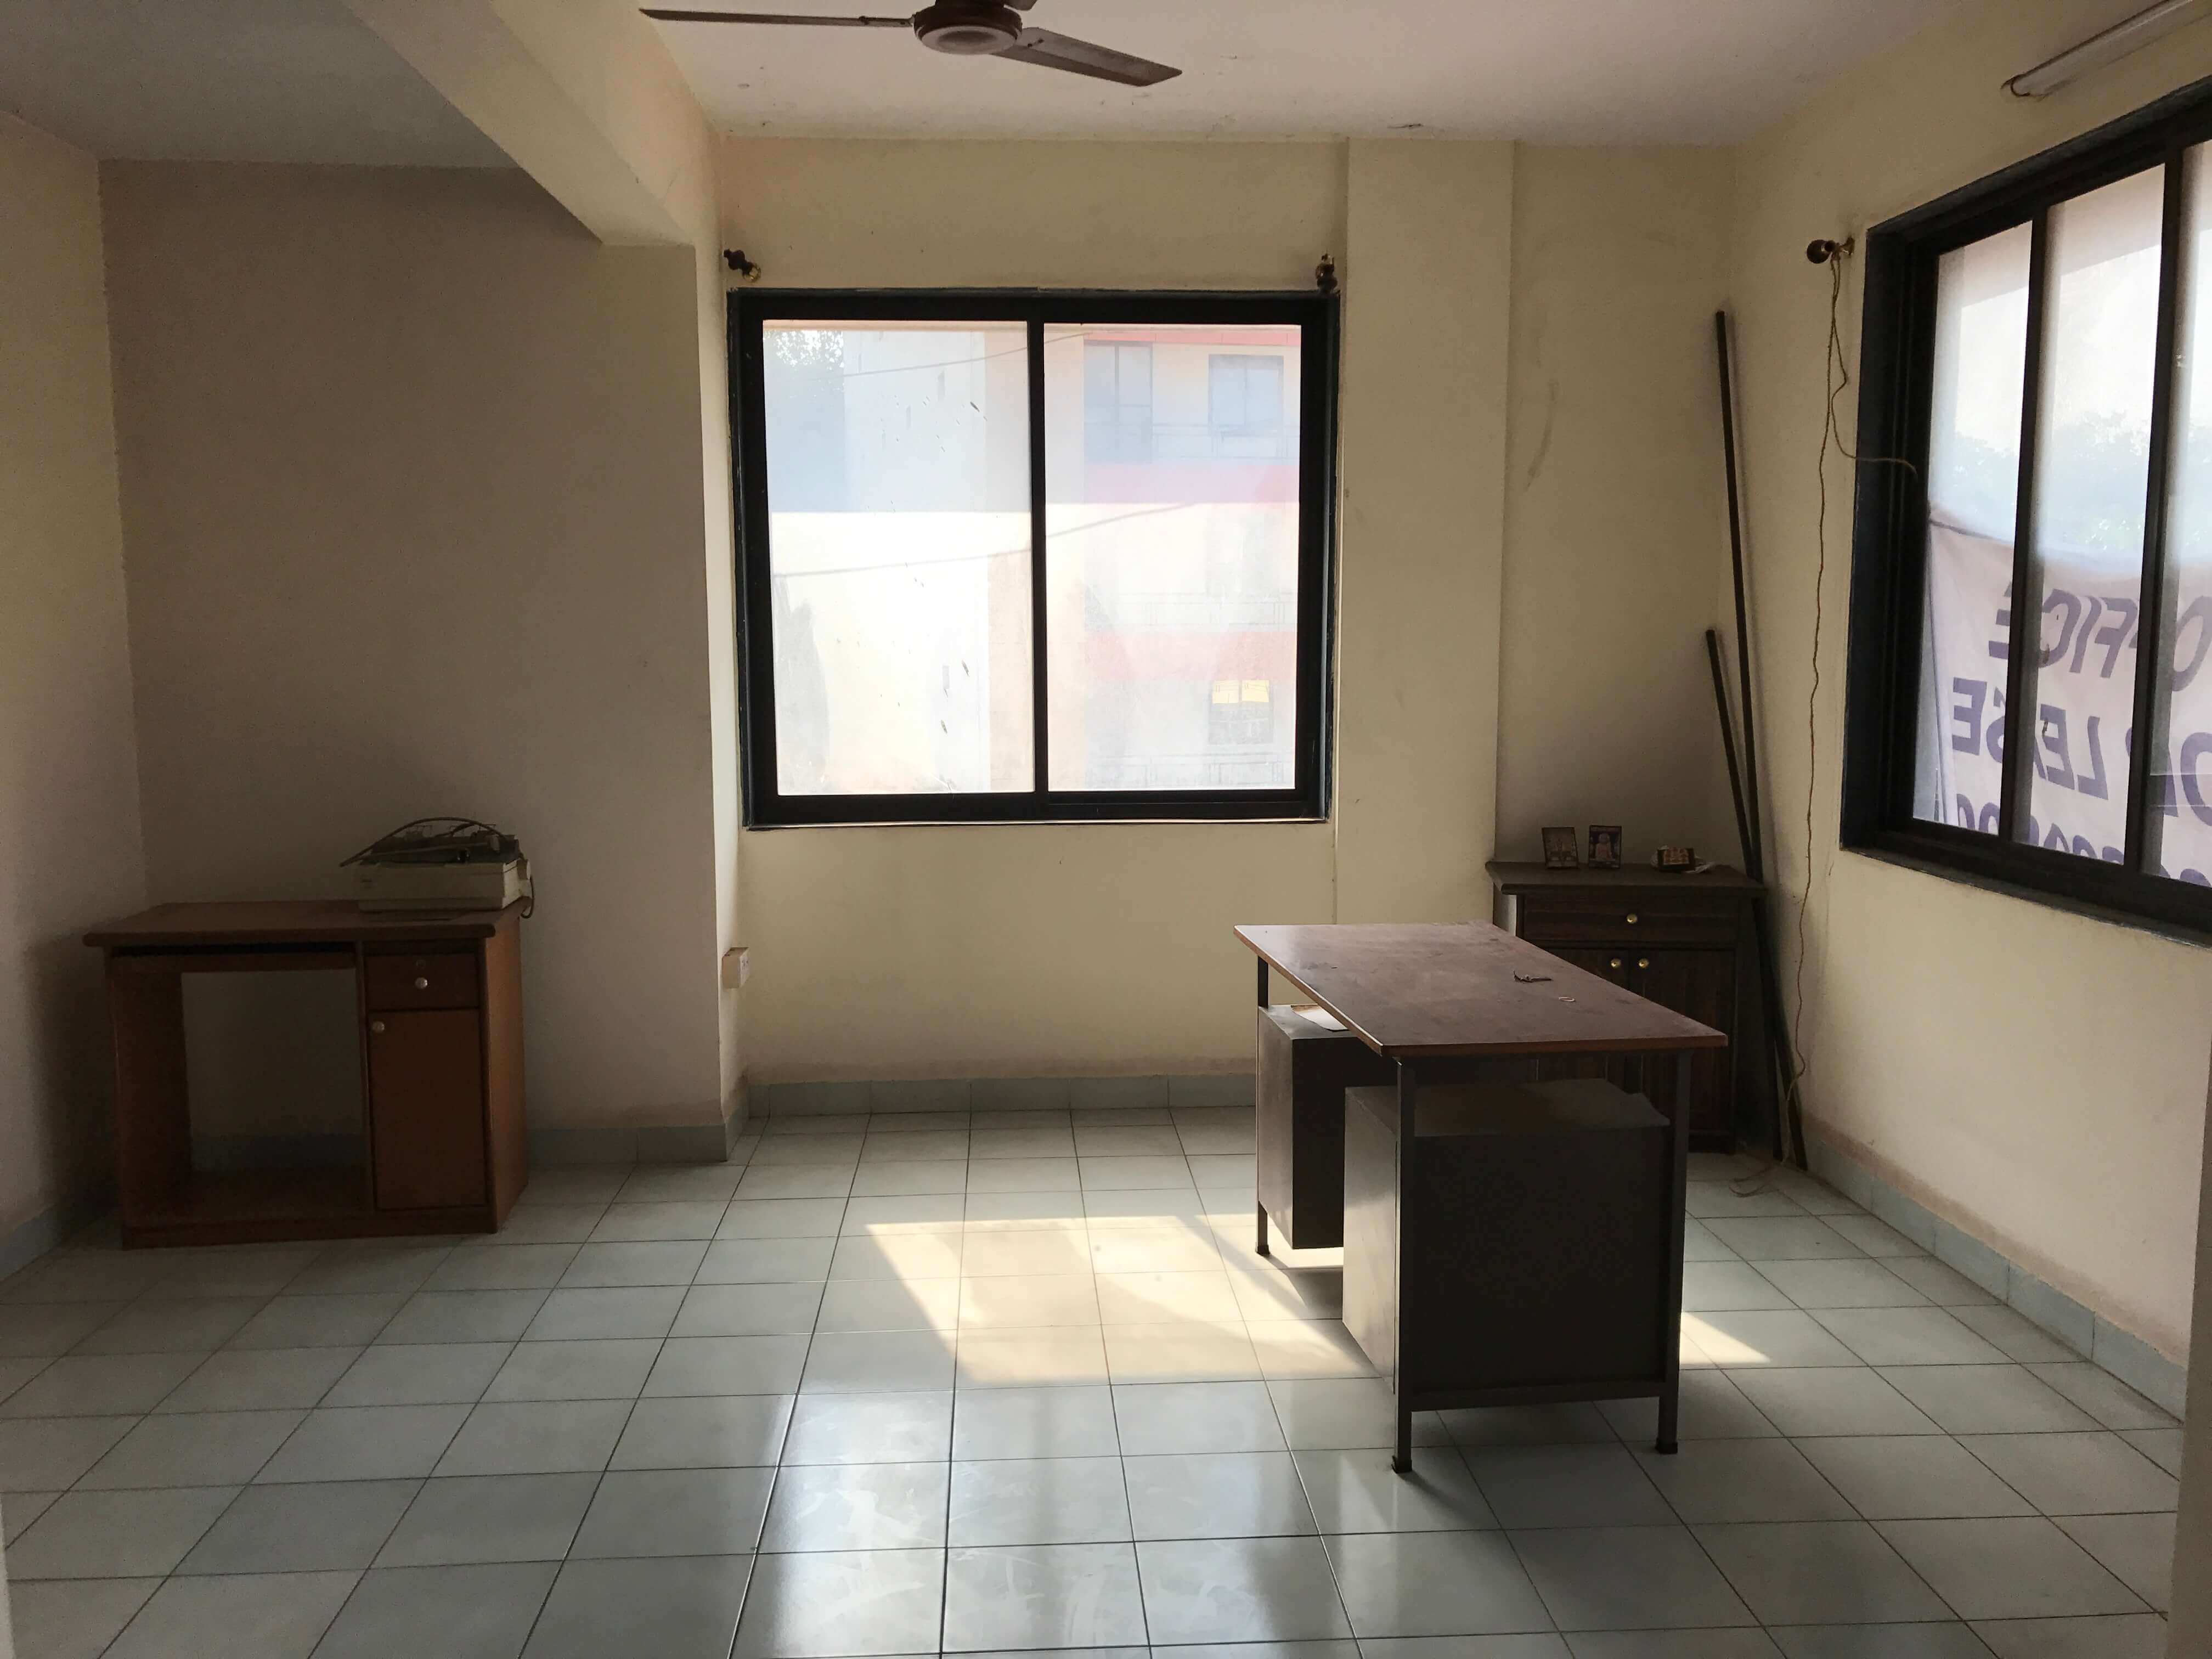 Unfurnished Office space for rent on 1st floor near Mapusa, court, Goa